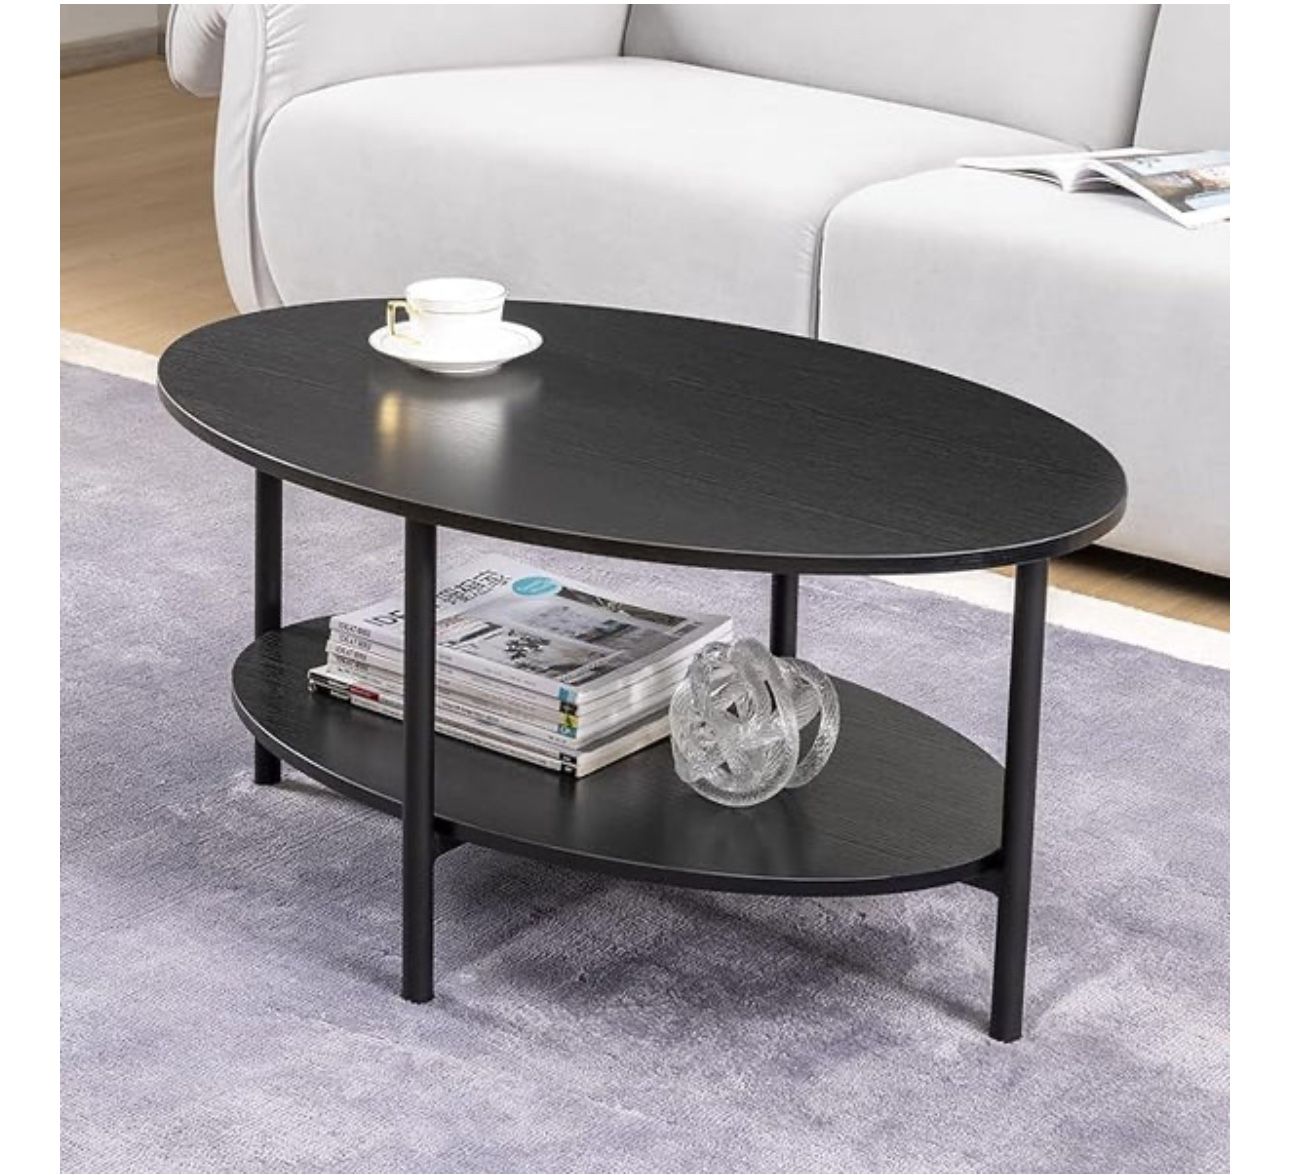 NEW-Coffee Table